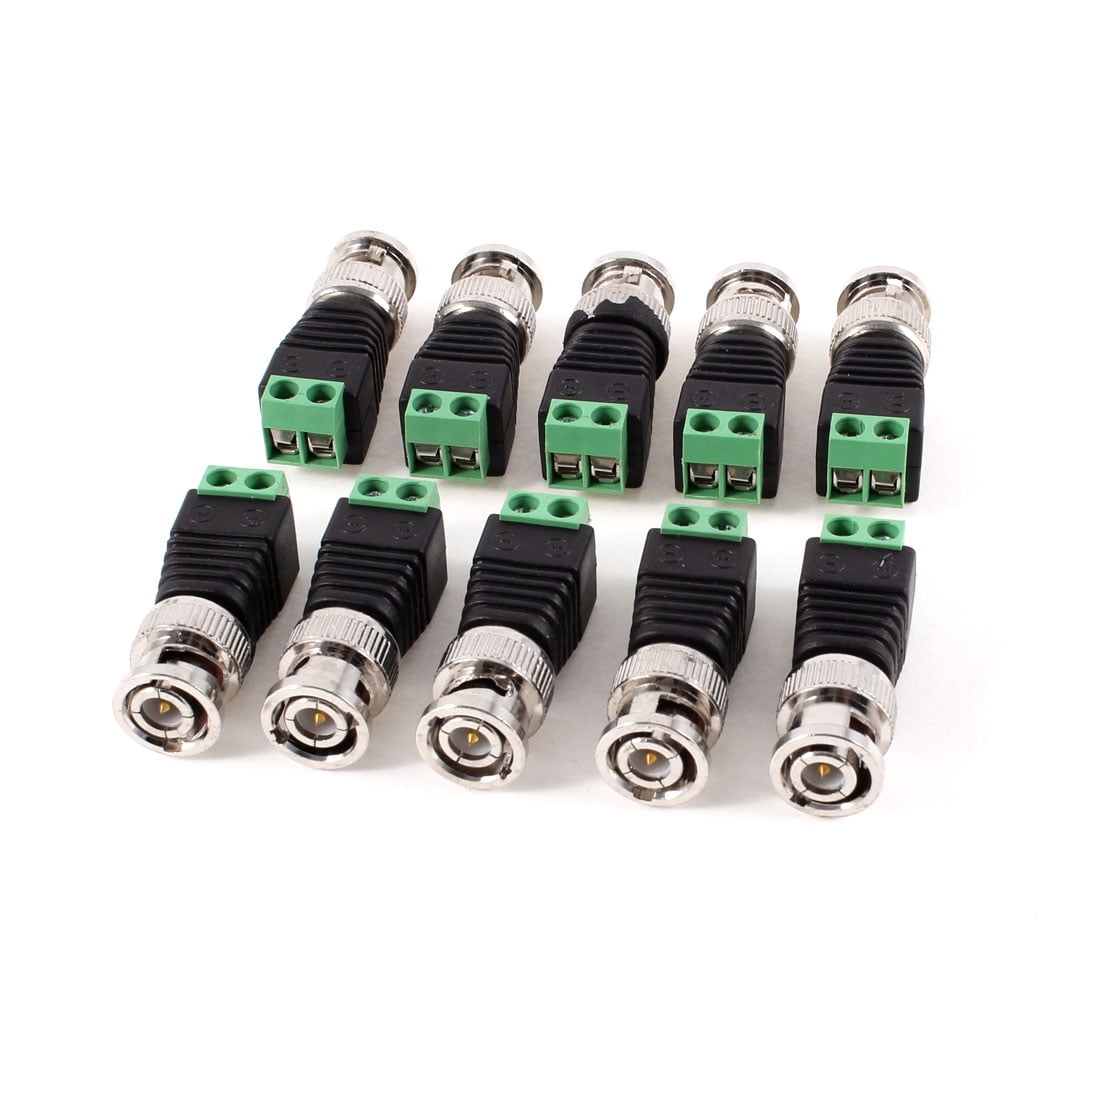 10X CAT5 UTP TO COAXIAL CAMERA CCTV TV POWER VIDEO BALUN BNC CABLE CONNECTORS 